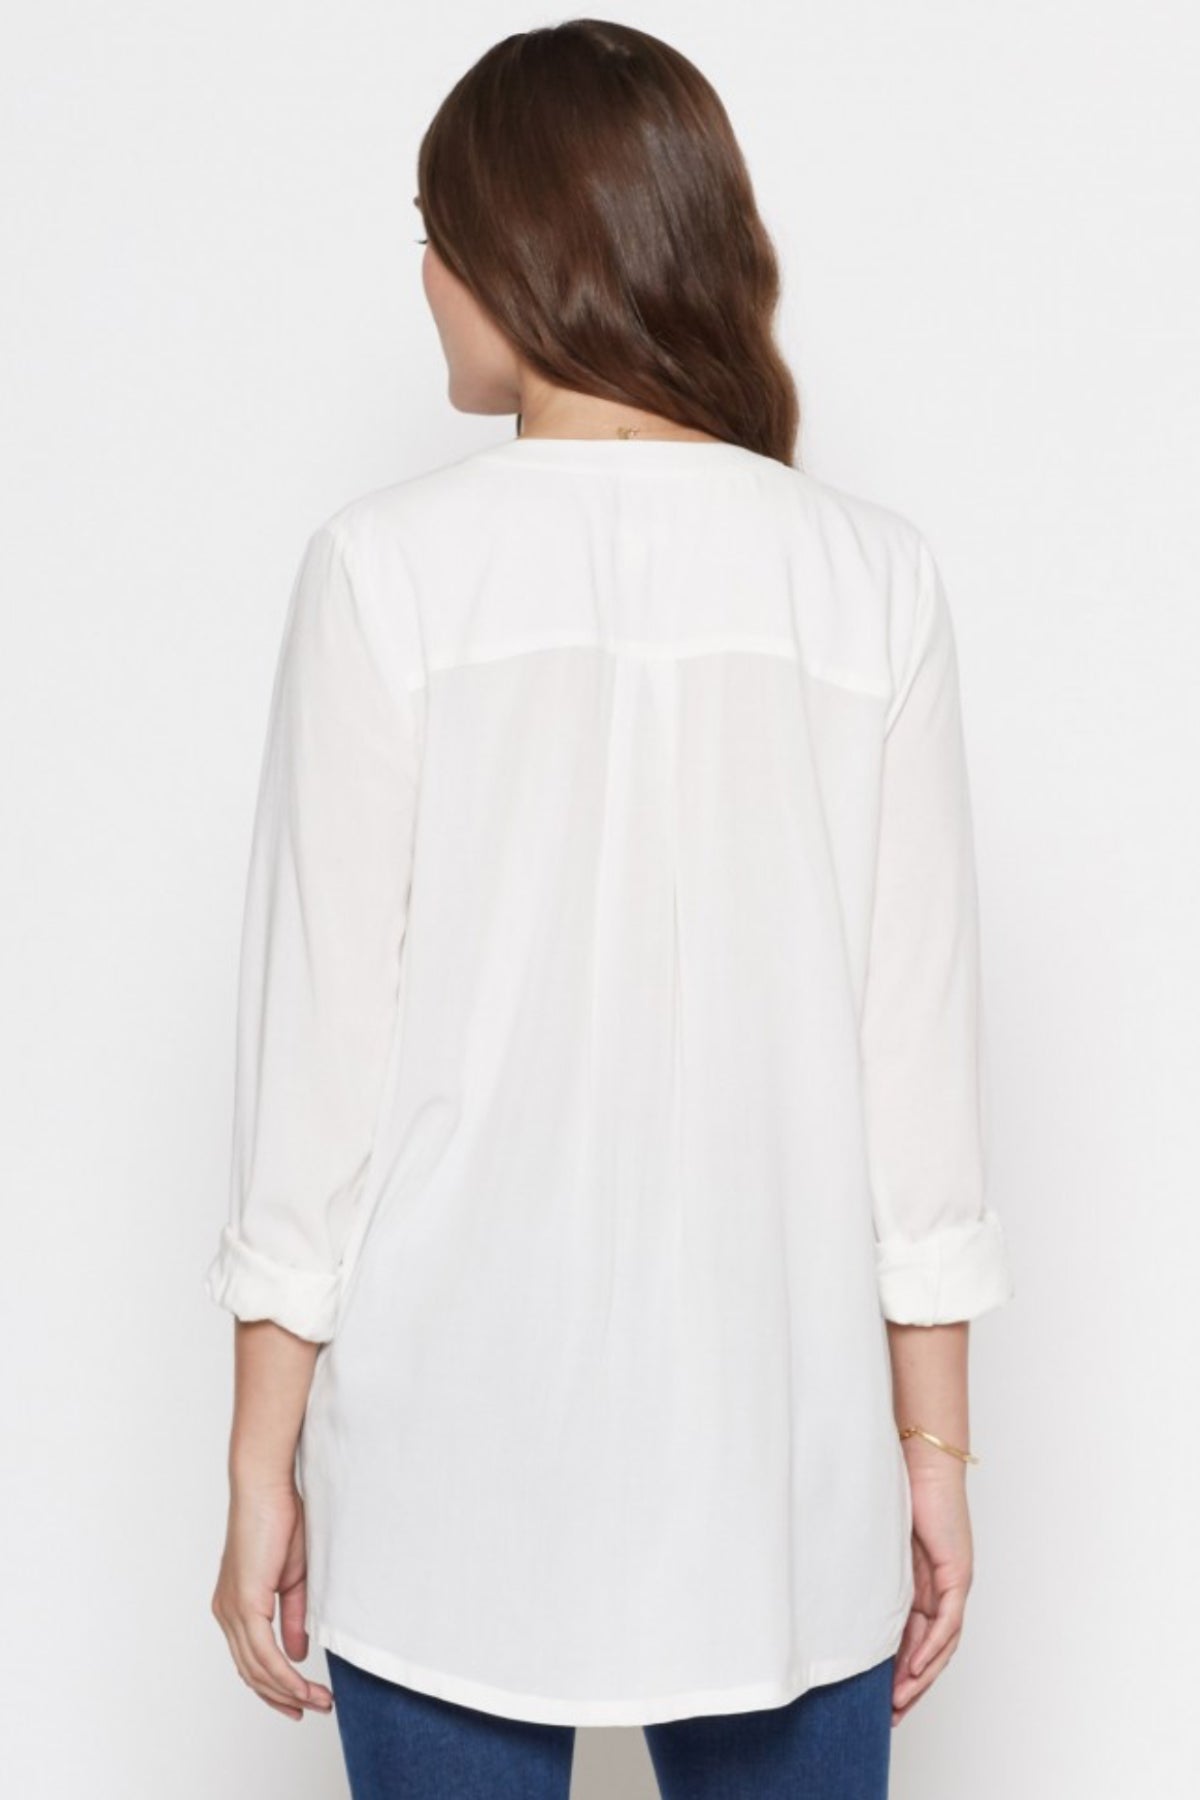 Joie Chasia Blouse